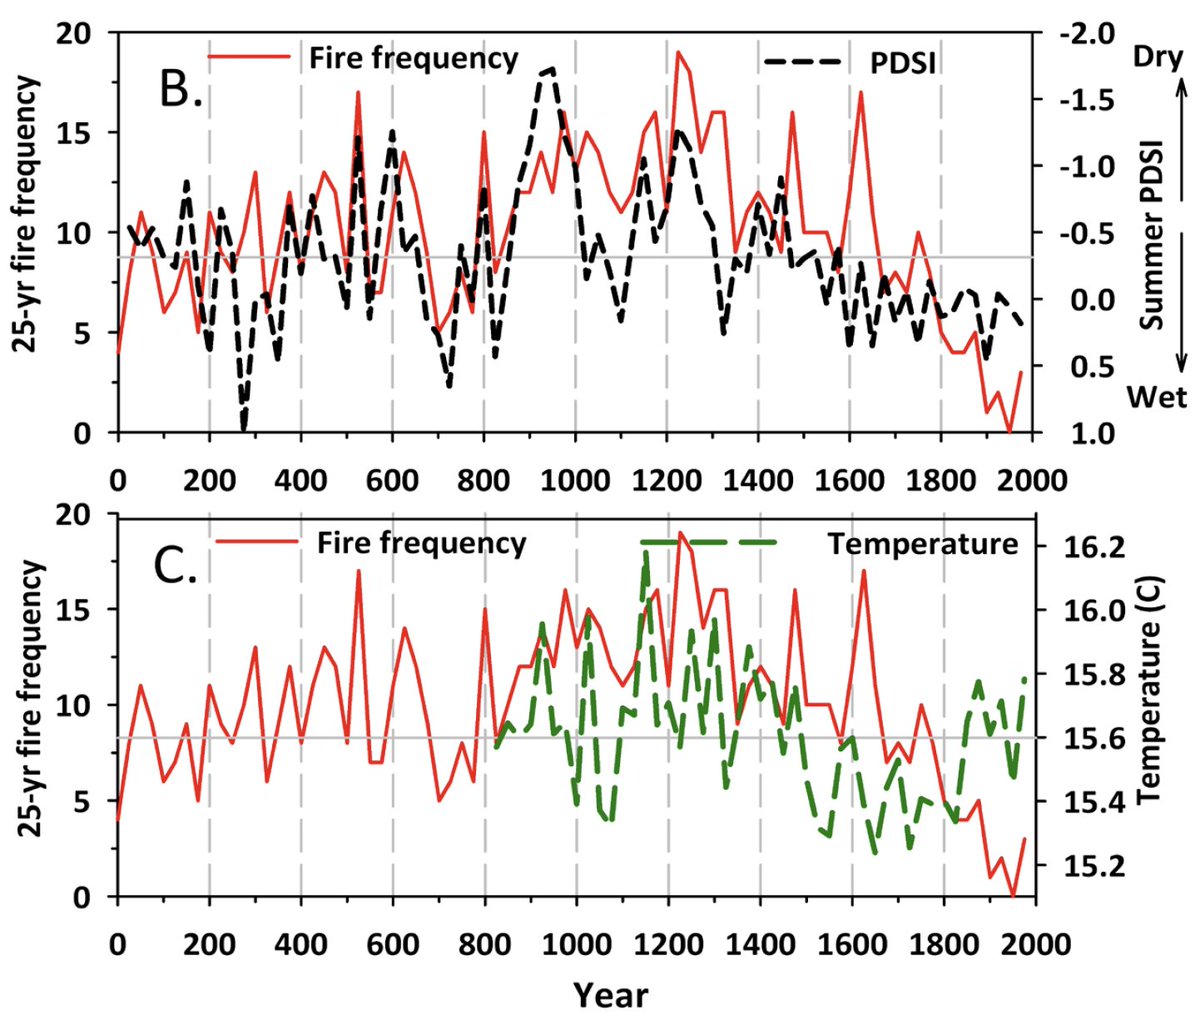 However, in giant sequoia groves fires were most frequent and generally lowest severity and extent during the driest, hottest periods in the past 2,000 years. Frequent fire builds resilience in sequoia groves by maintaining low fuel accumulations. 9/10  https://tinyurl.com/y2c8k4yy 